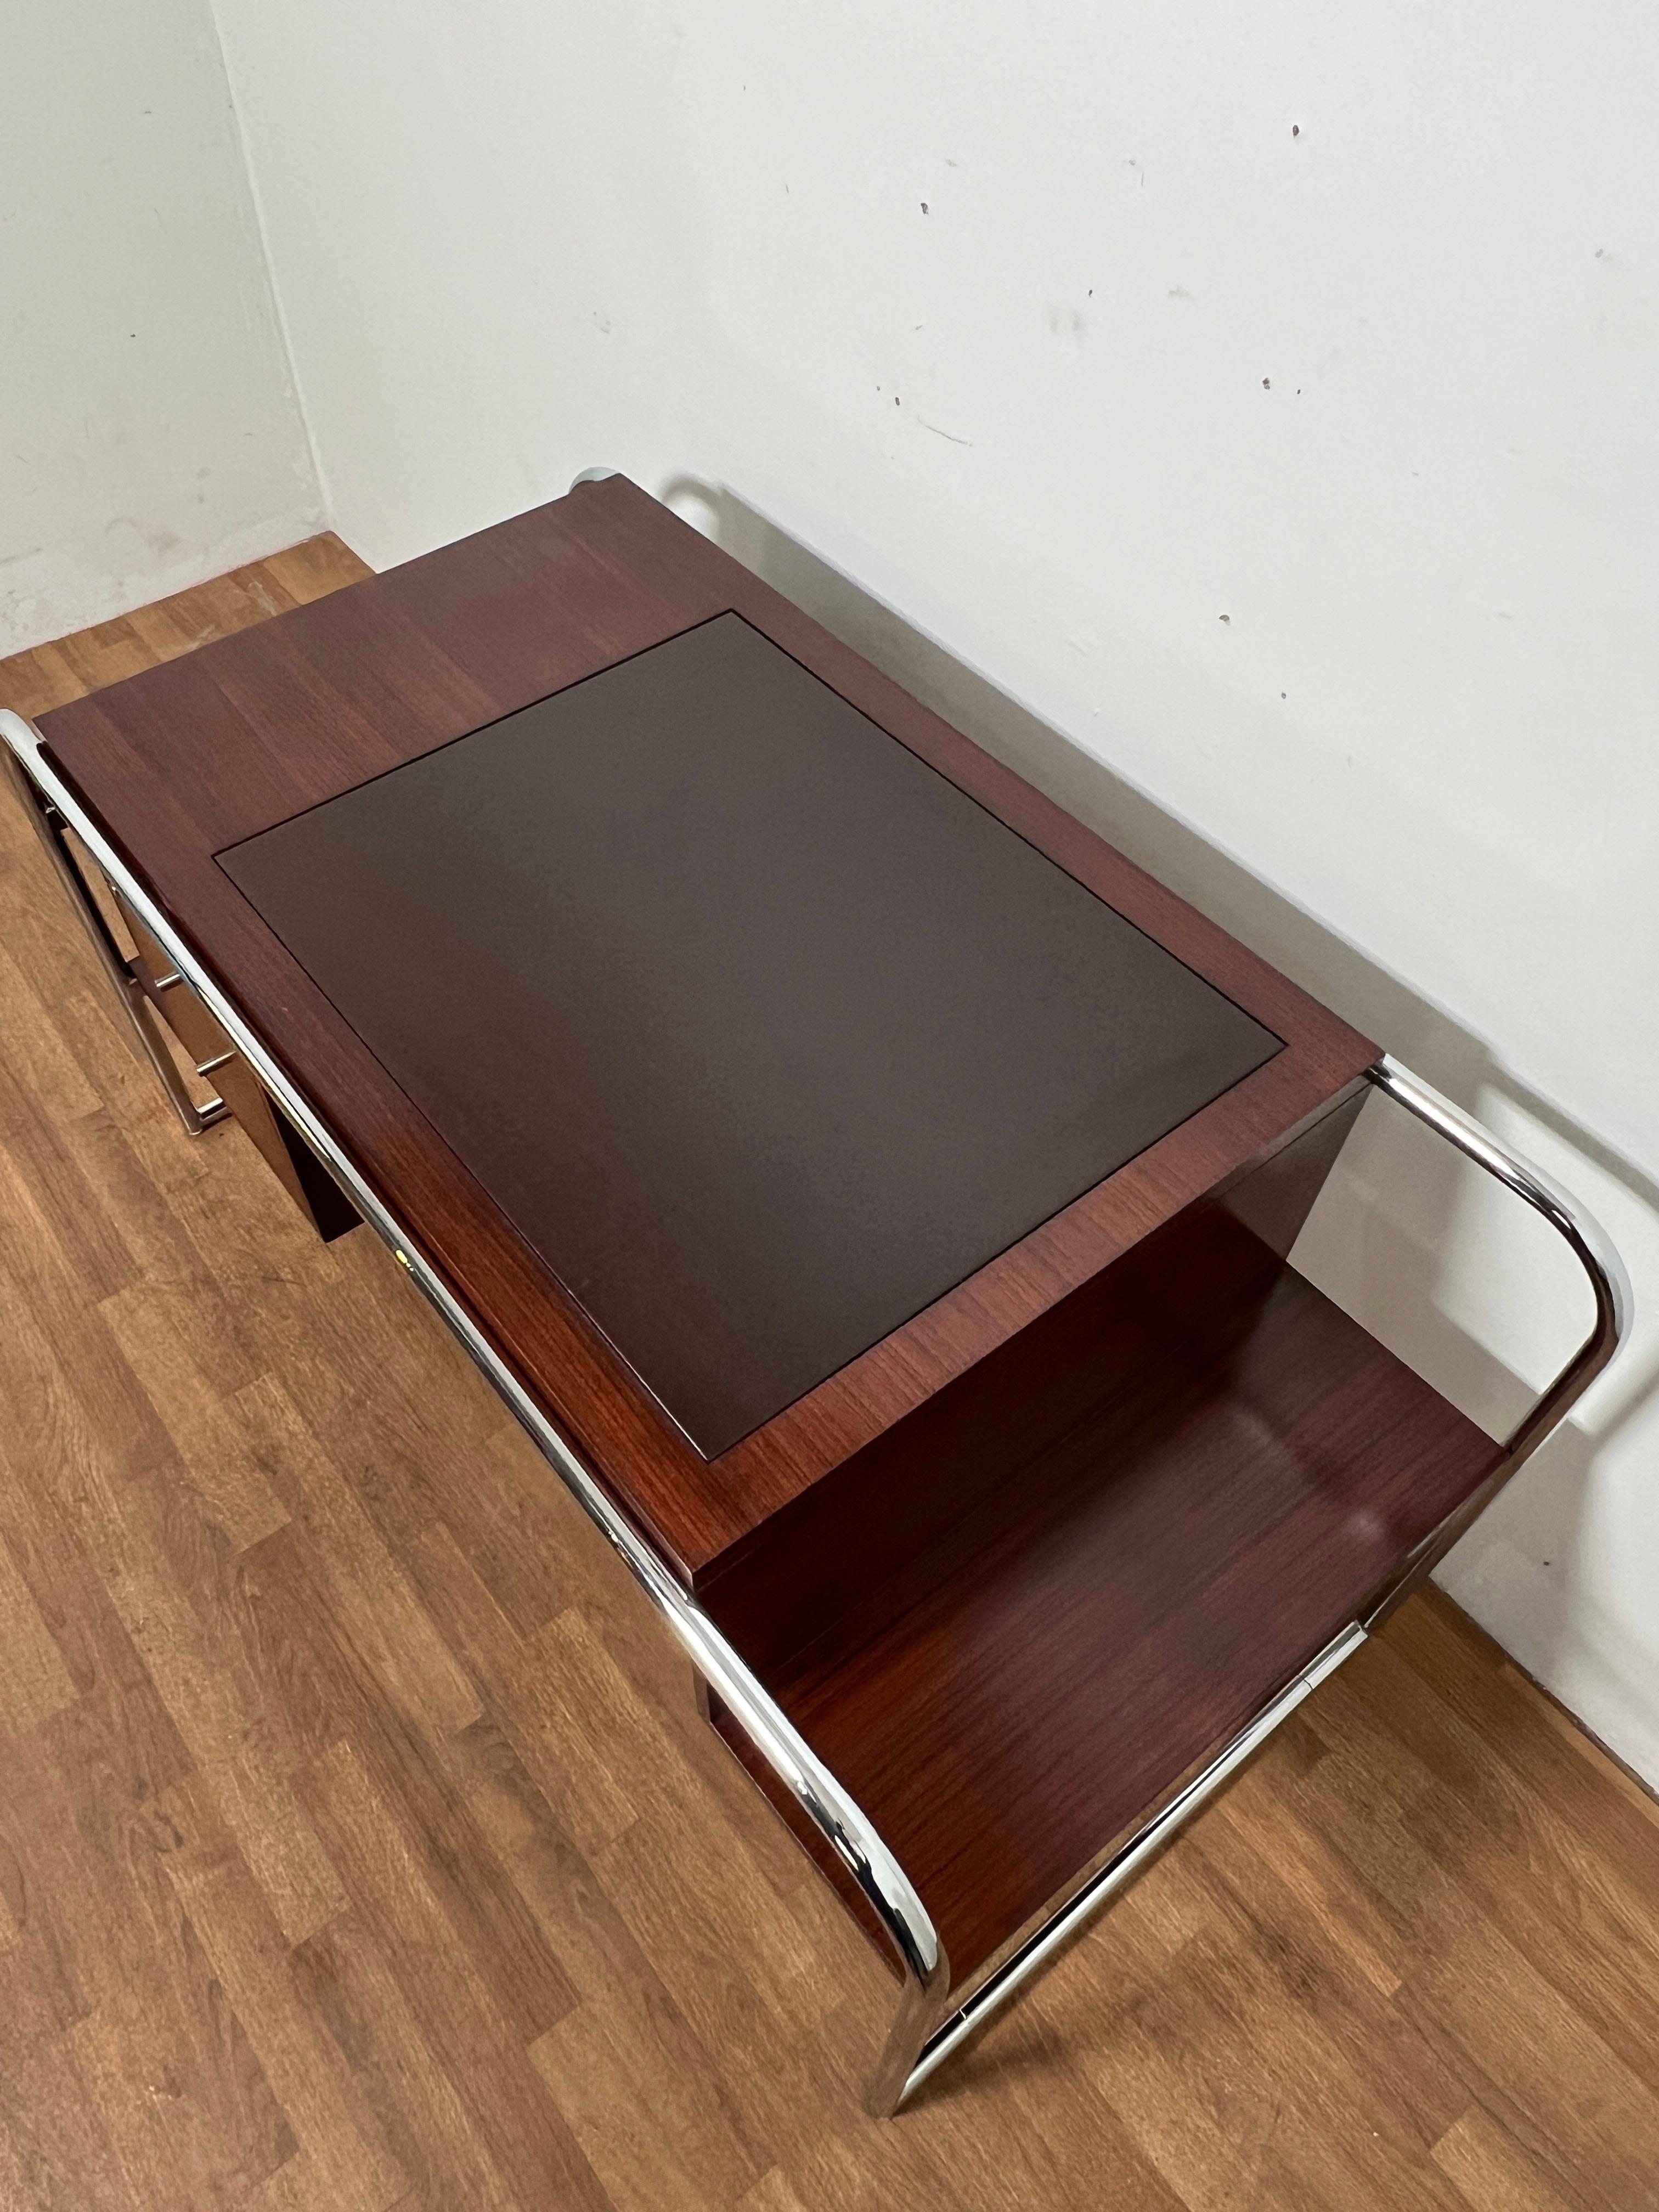 Ralph Lauren Bauhaus Inspired Desk in Rosewood, Chrome and Leather For Sale 1